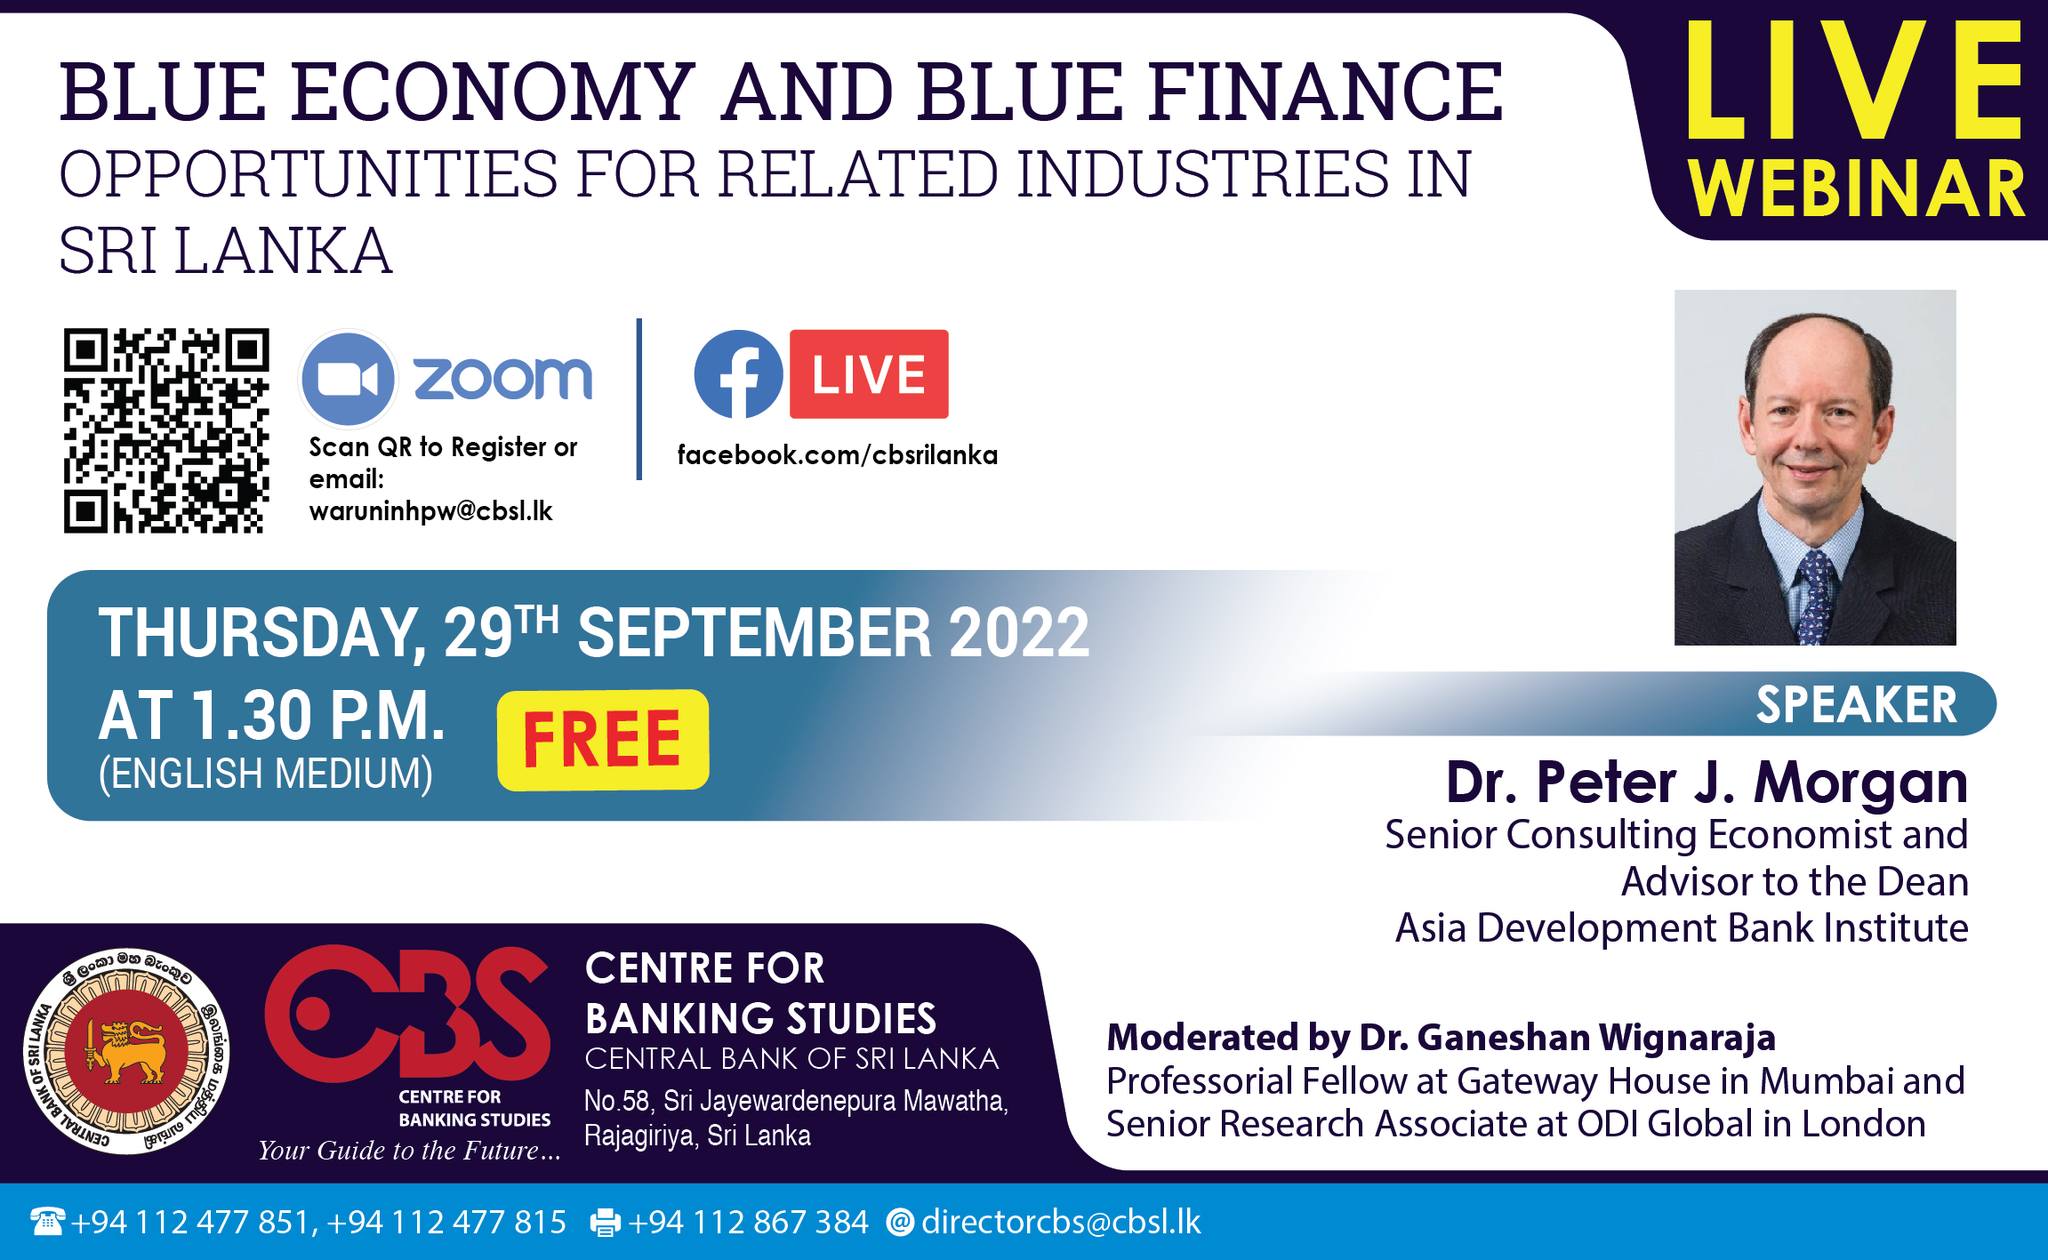 Public Seminar on “Blue Economy and Blue Finance – Opportunities for Related Industries in Sri Lanka”